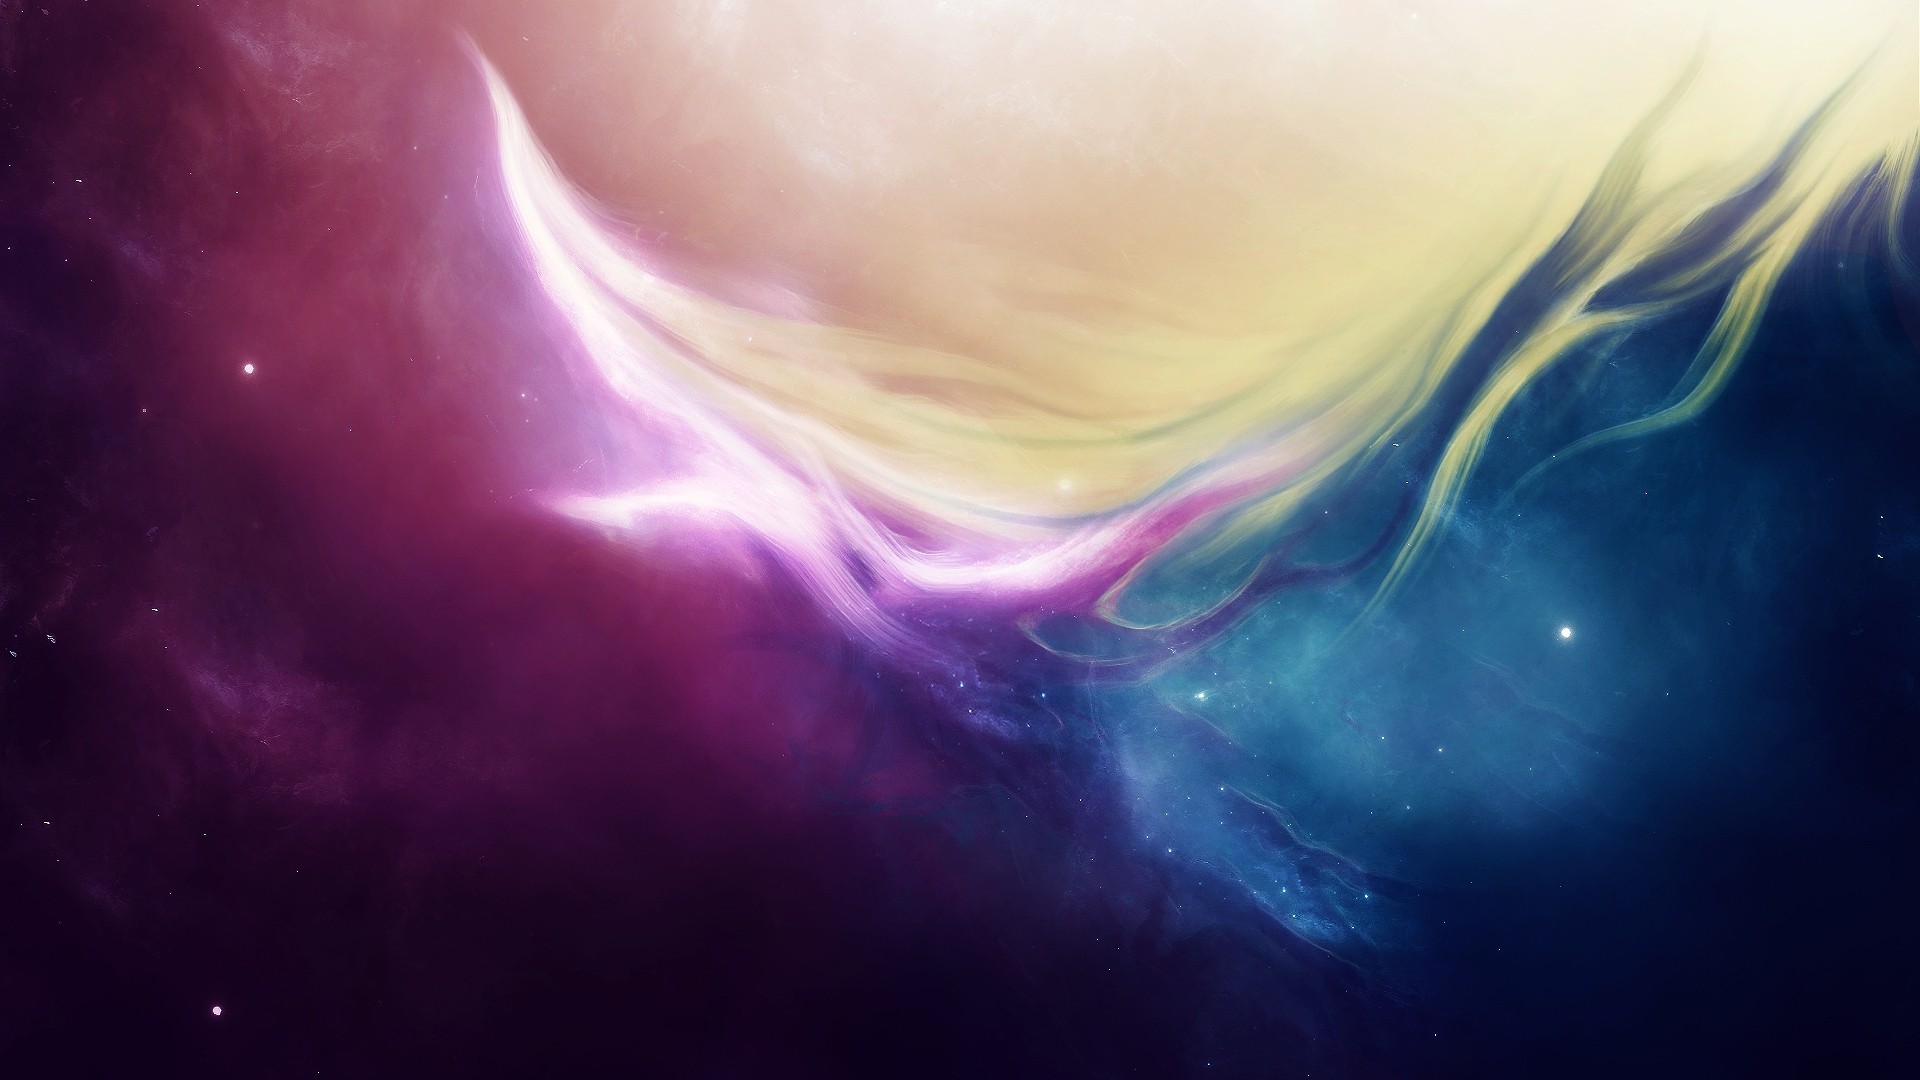 colorful, Space Art, Artwork, Abstract, Nebula, Space Wallpapers HD